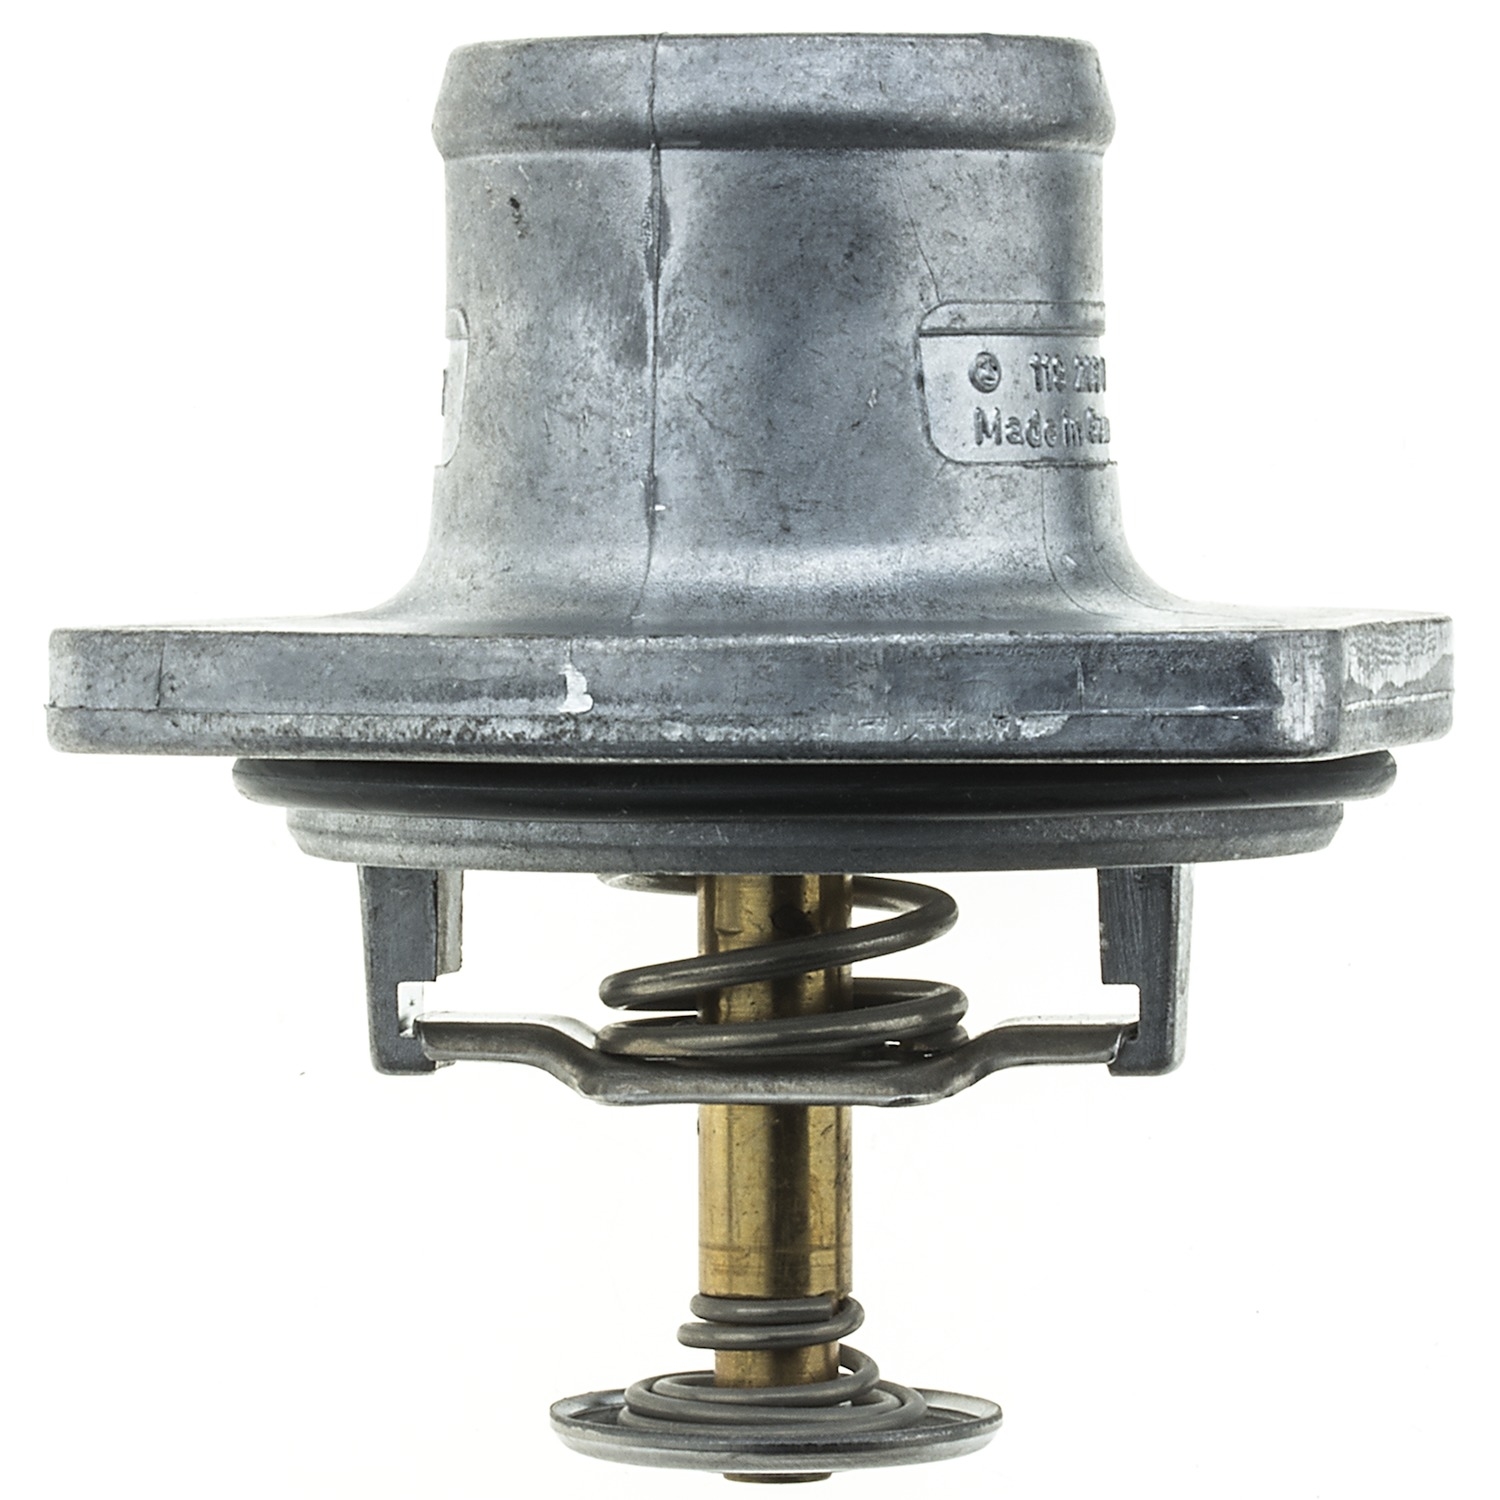 STANT - Integrated Thermostat Housing - STN 14598